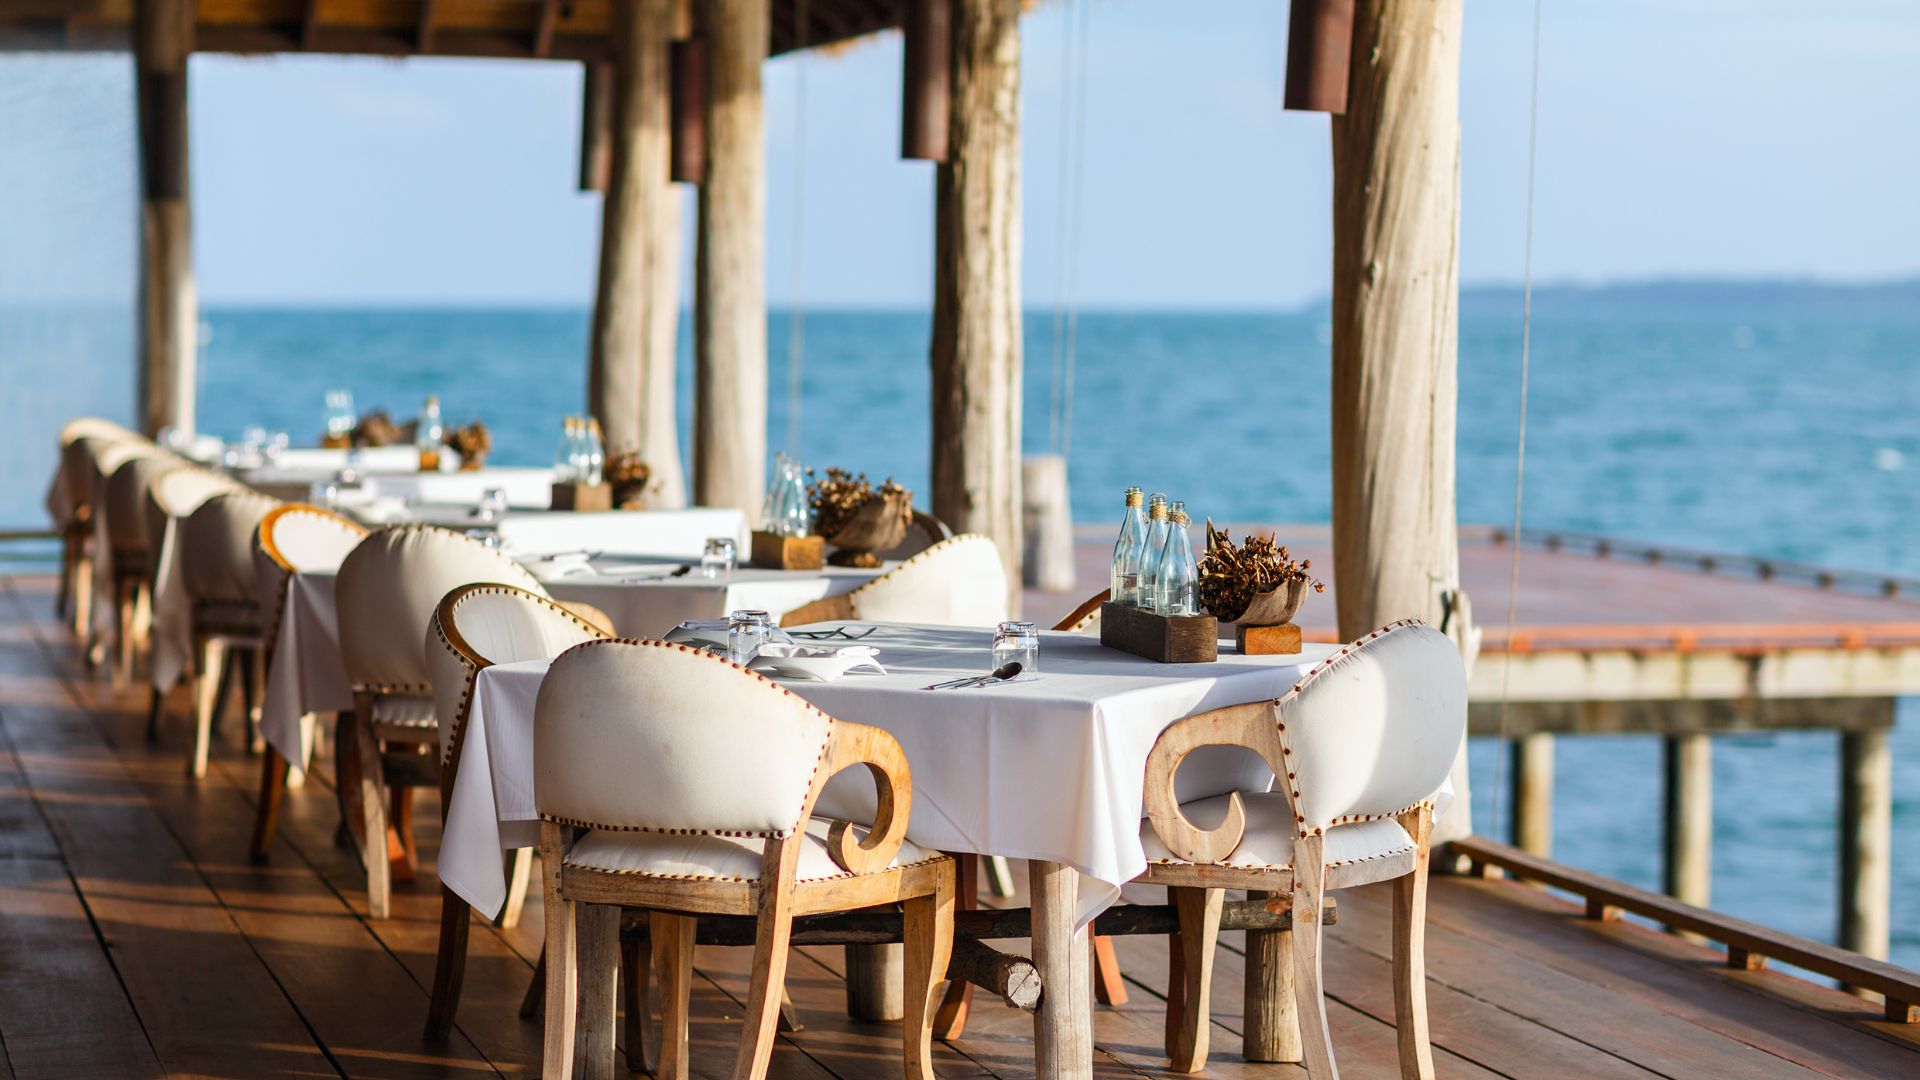 A group of tables with white seats with the ocean in the background